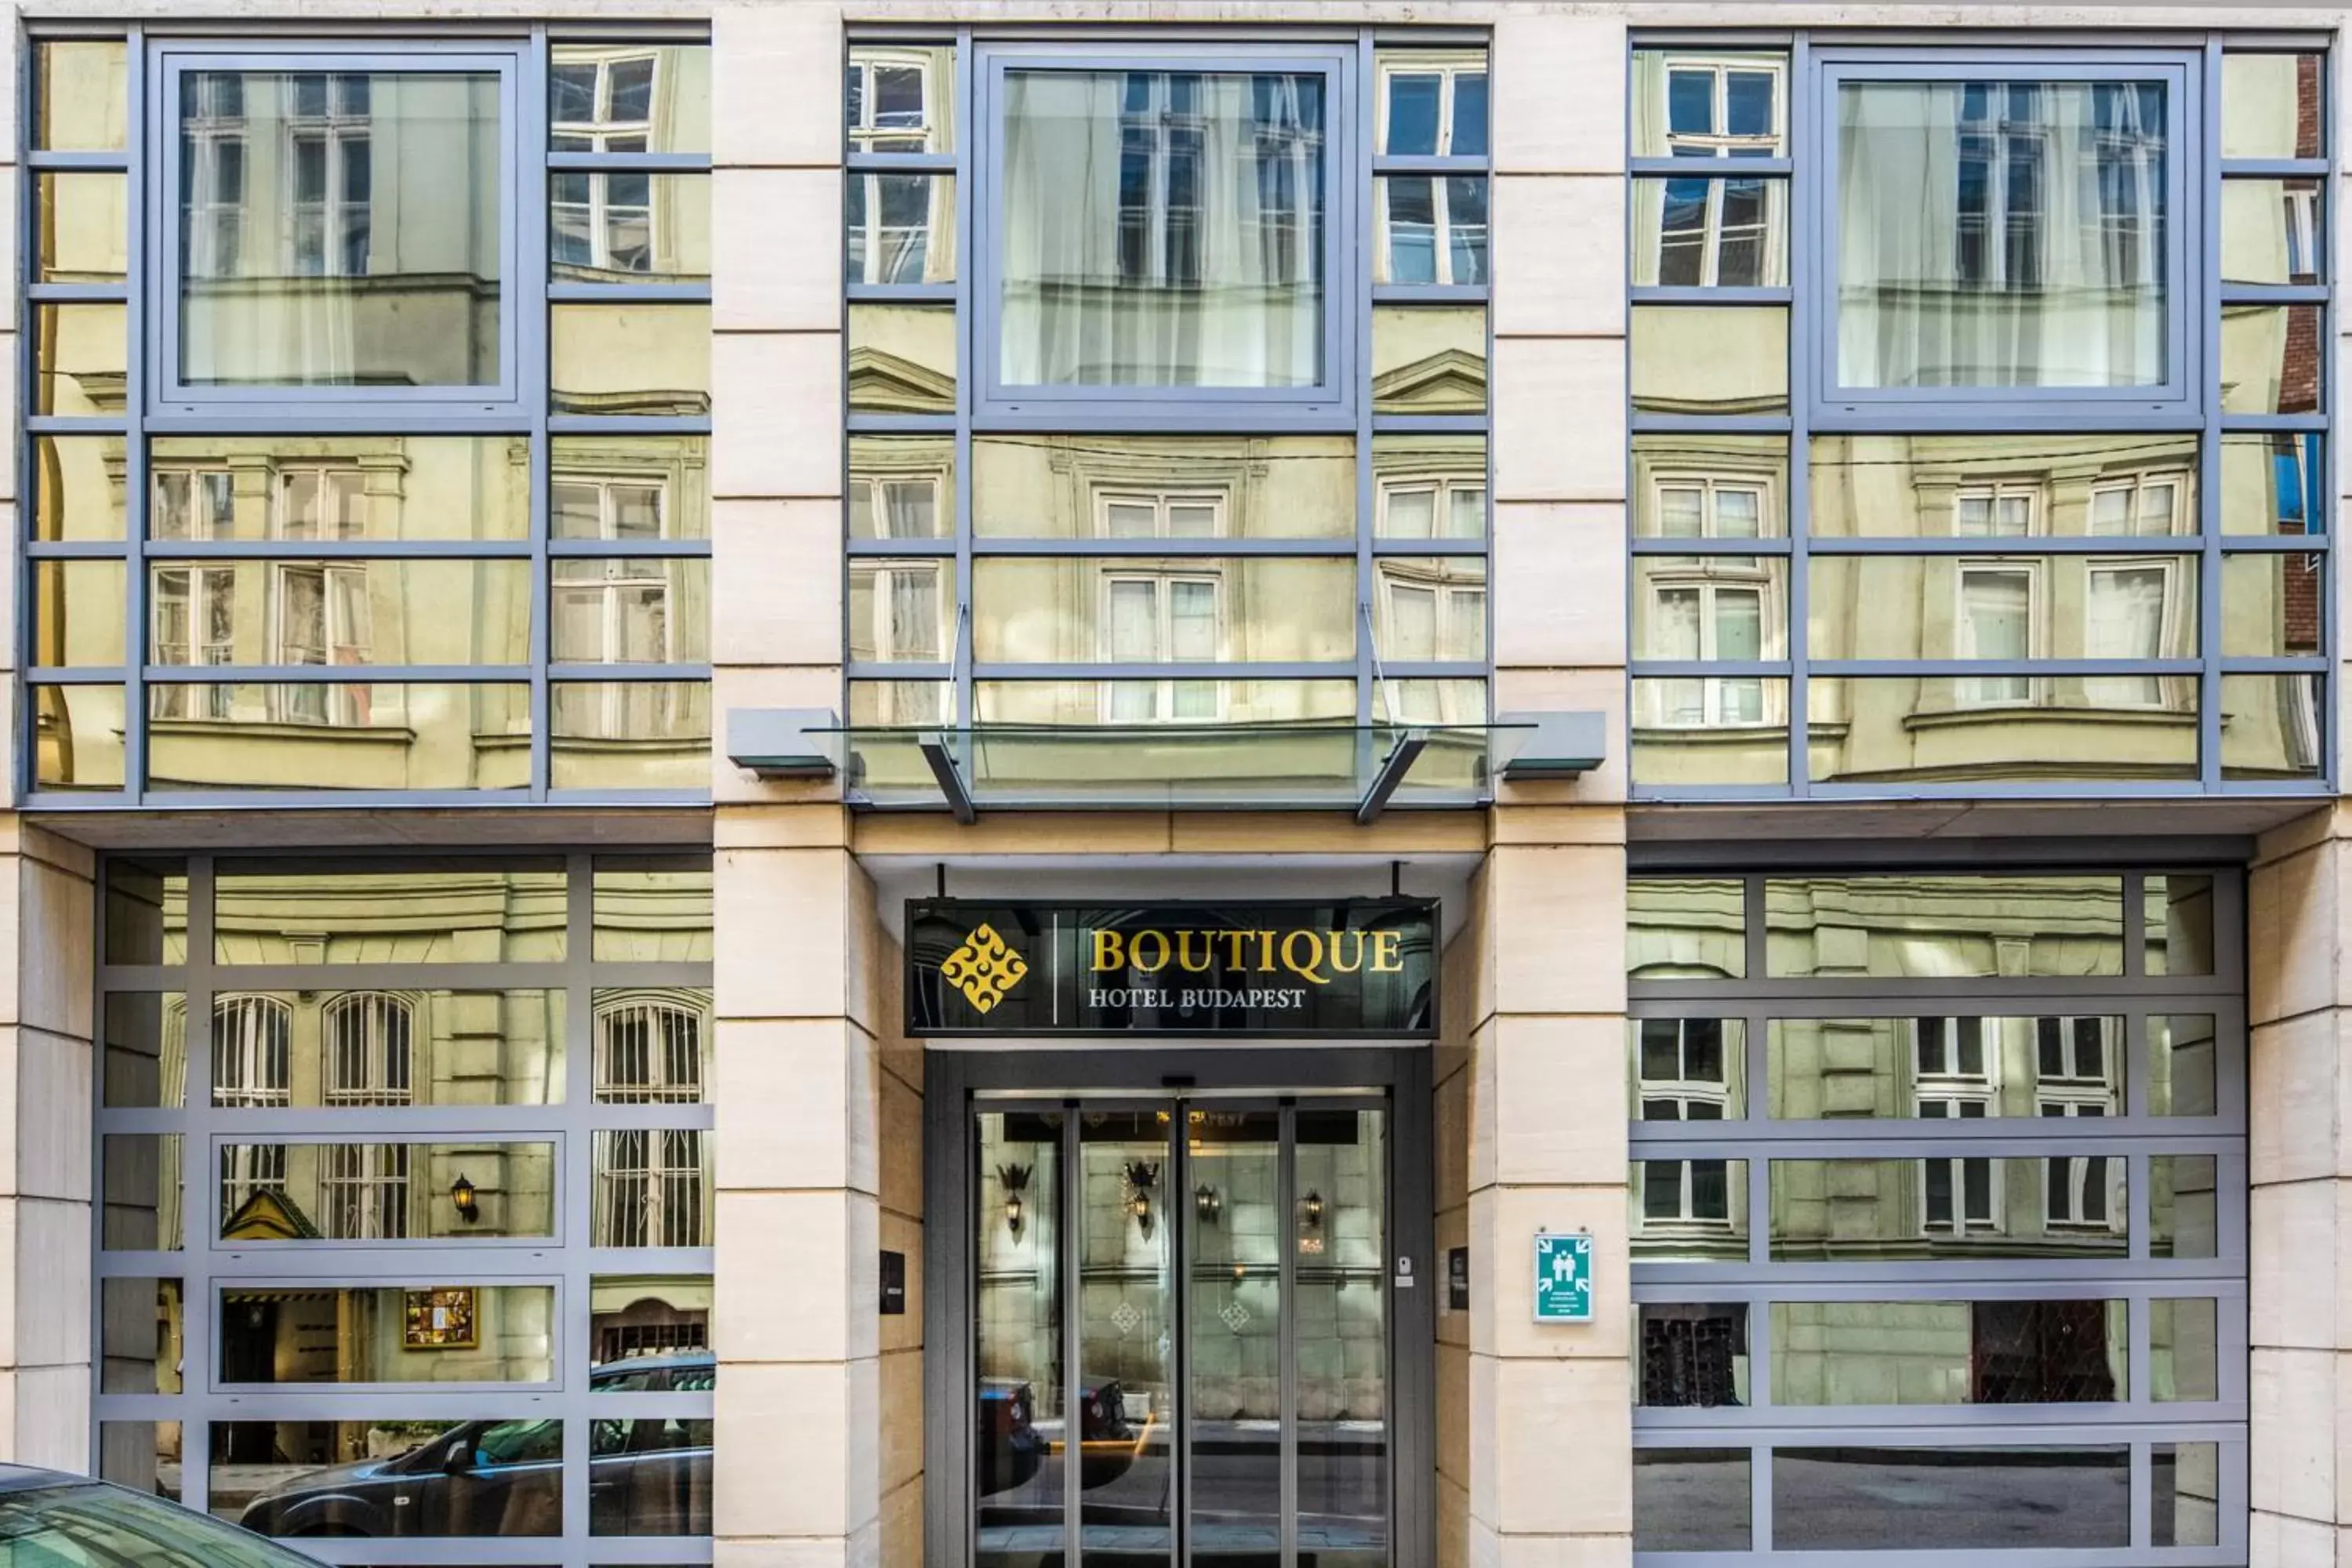 Property building in Boutique Hotel Budapest